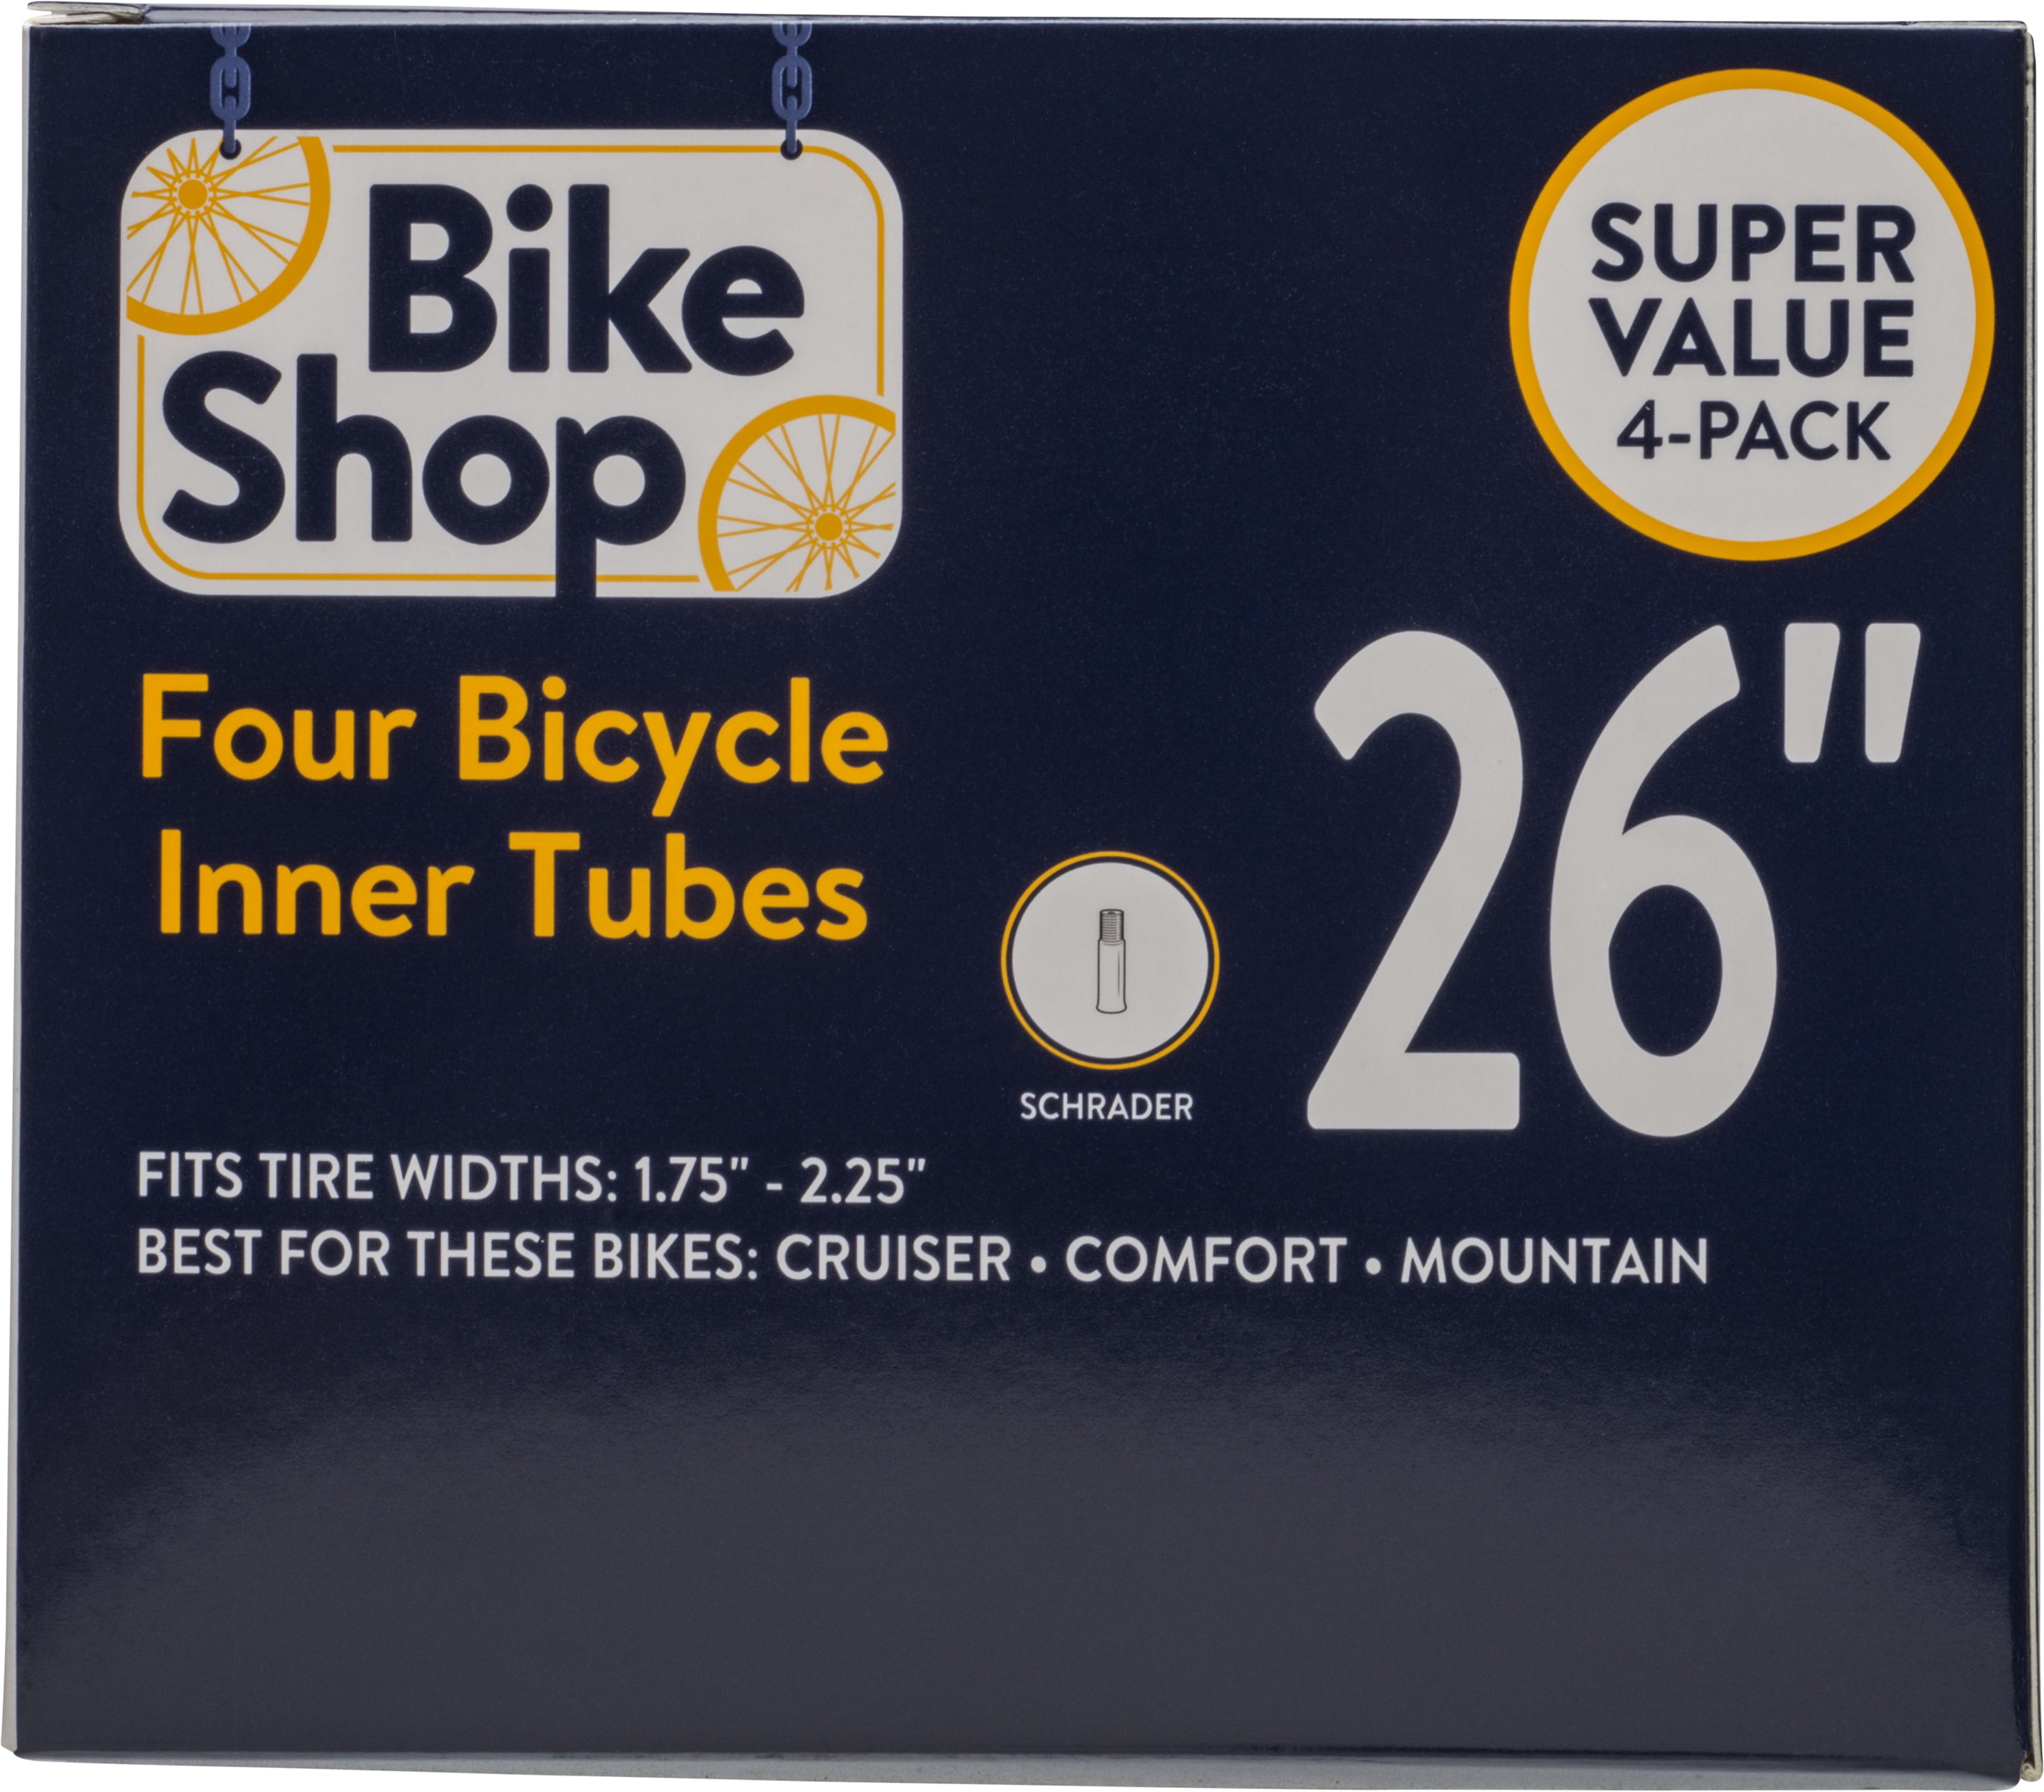 4 Bell 26" Bicycle Inner Tube Fits Tire Widths X 1.75-2.25 Standard Valve for sale online 